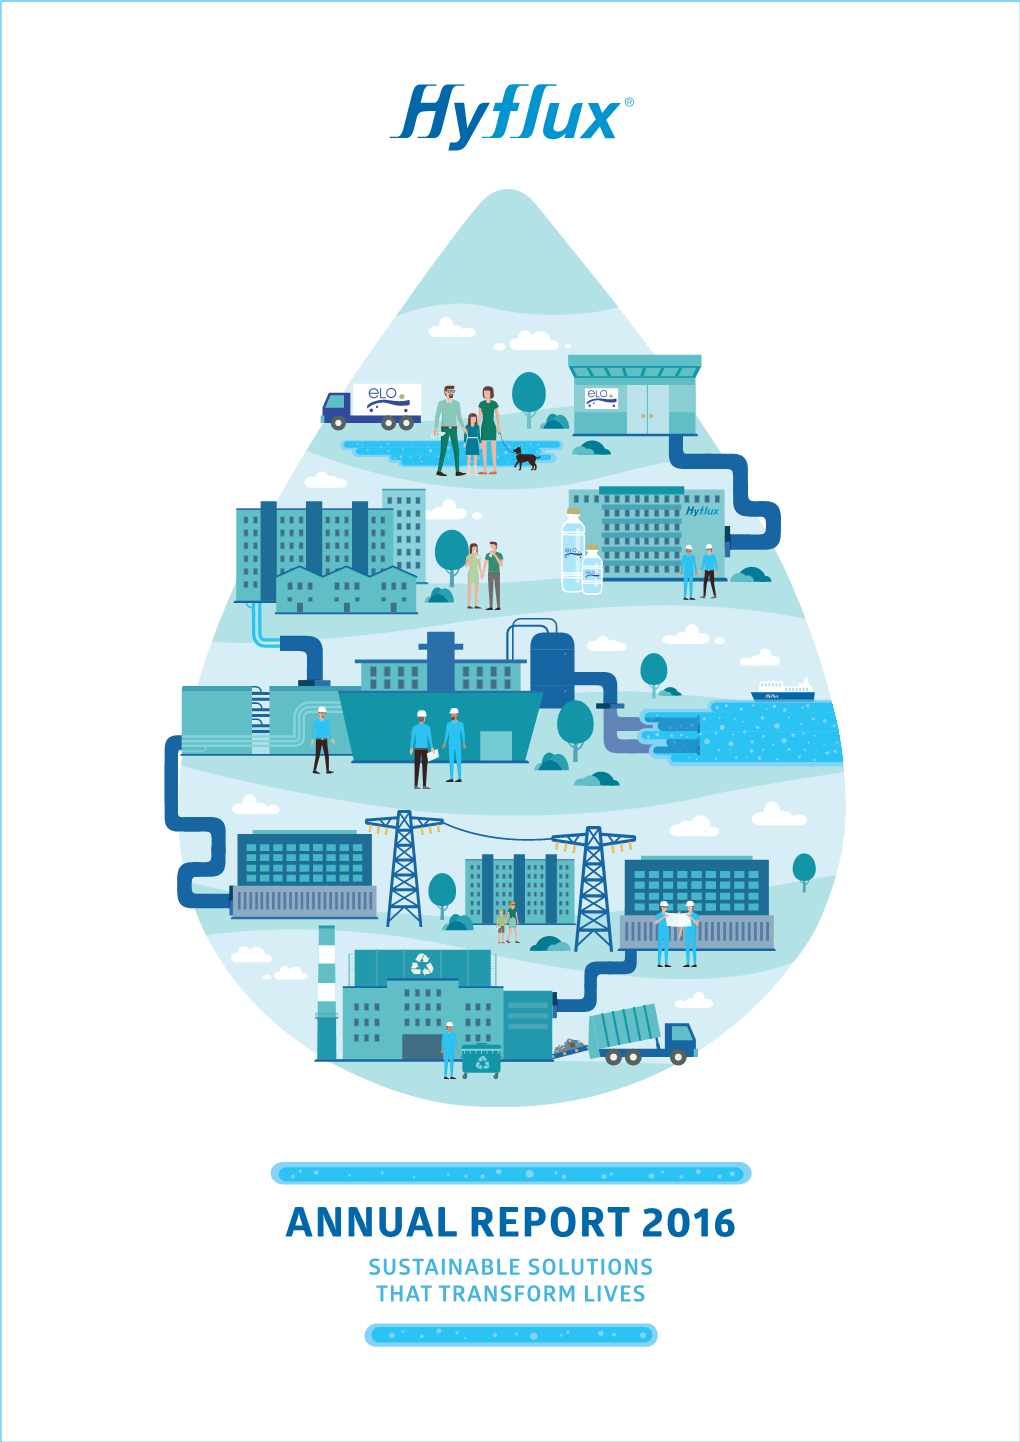 ANNUAL REPORT 2016 SUSTAINABLE SOLUTIONS THAT TRANSFORM LIVES Our Vision